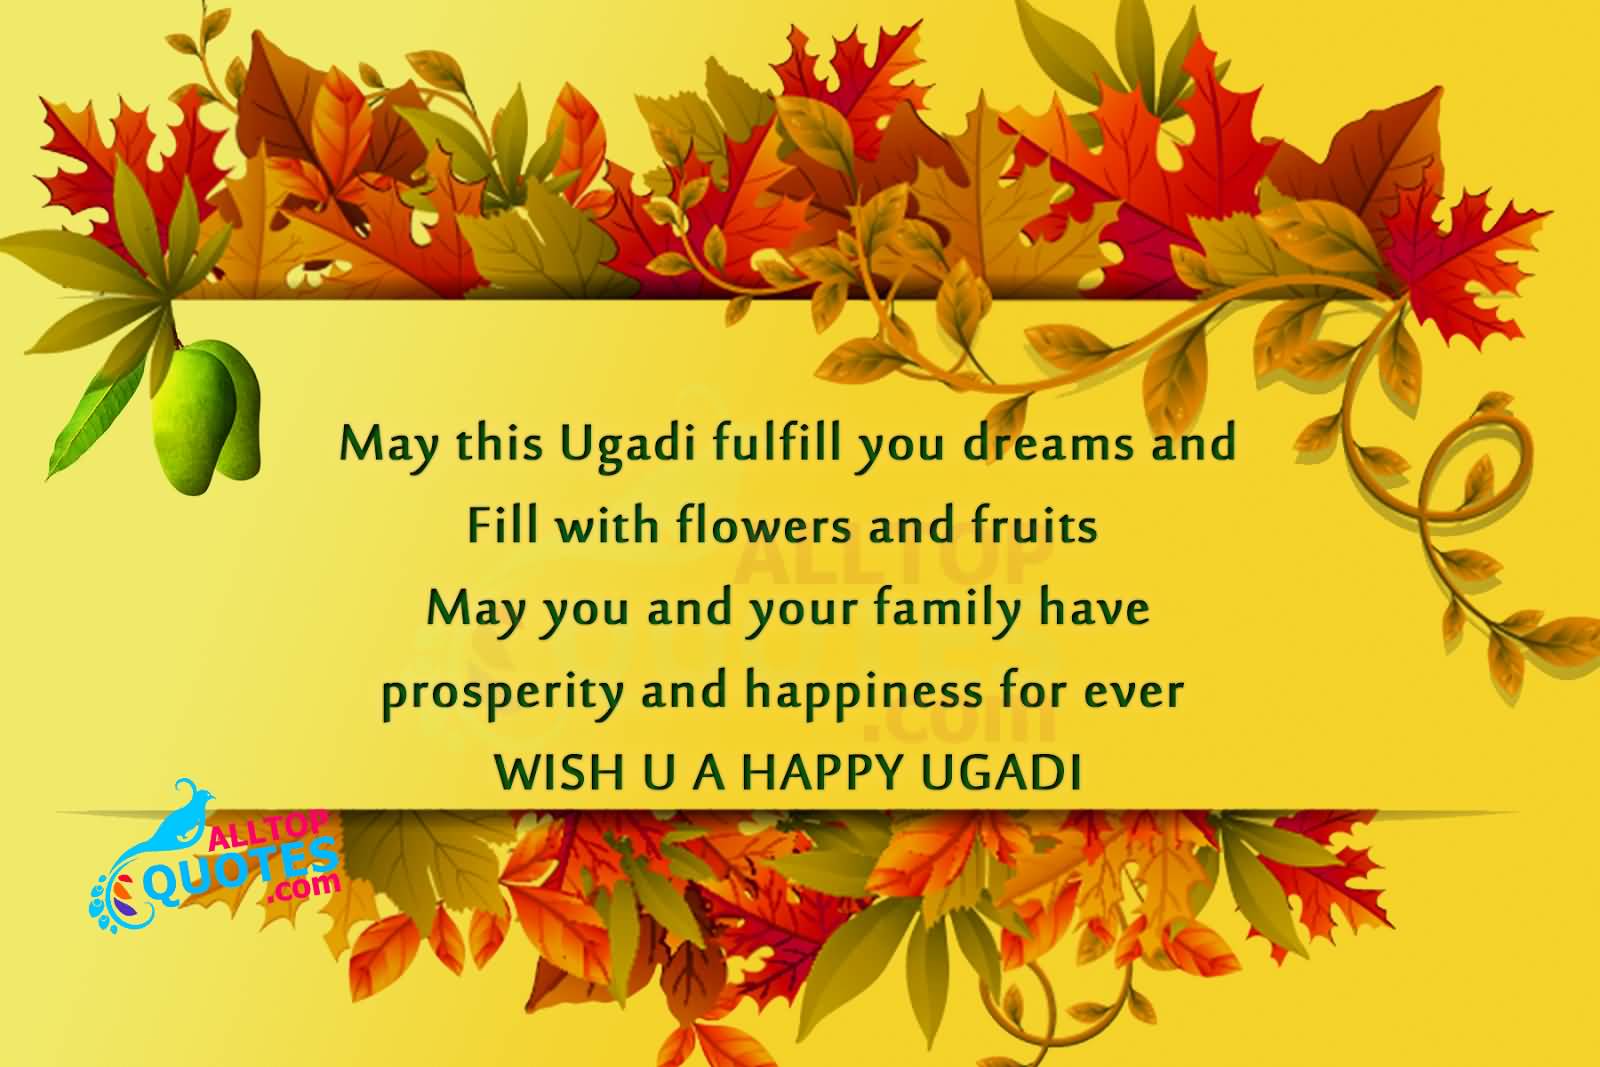 May This Ugadi Fulfill Your Dreams And Fill With Flowers And Fruits May You And Your Family Have Prosperity And Happiness For Ever Wish You A Happy Ugadi